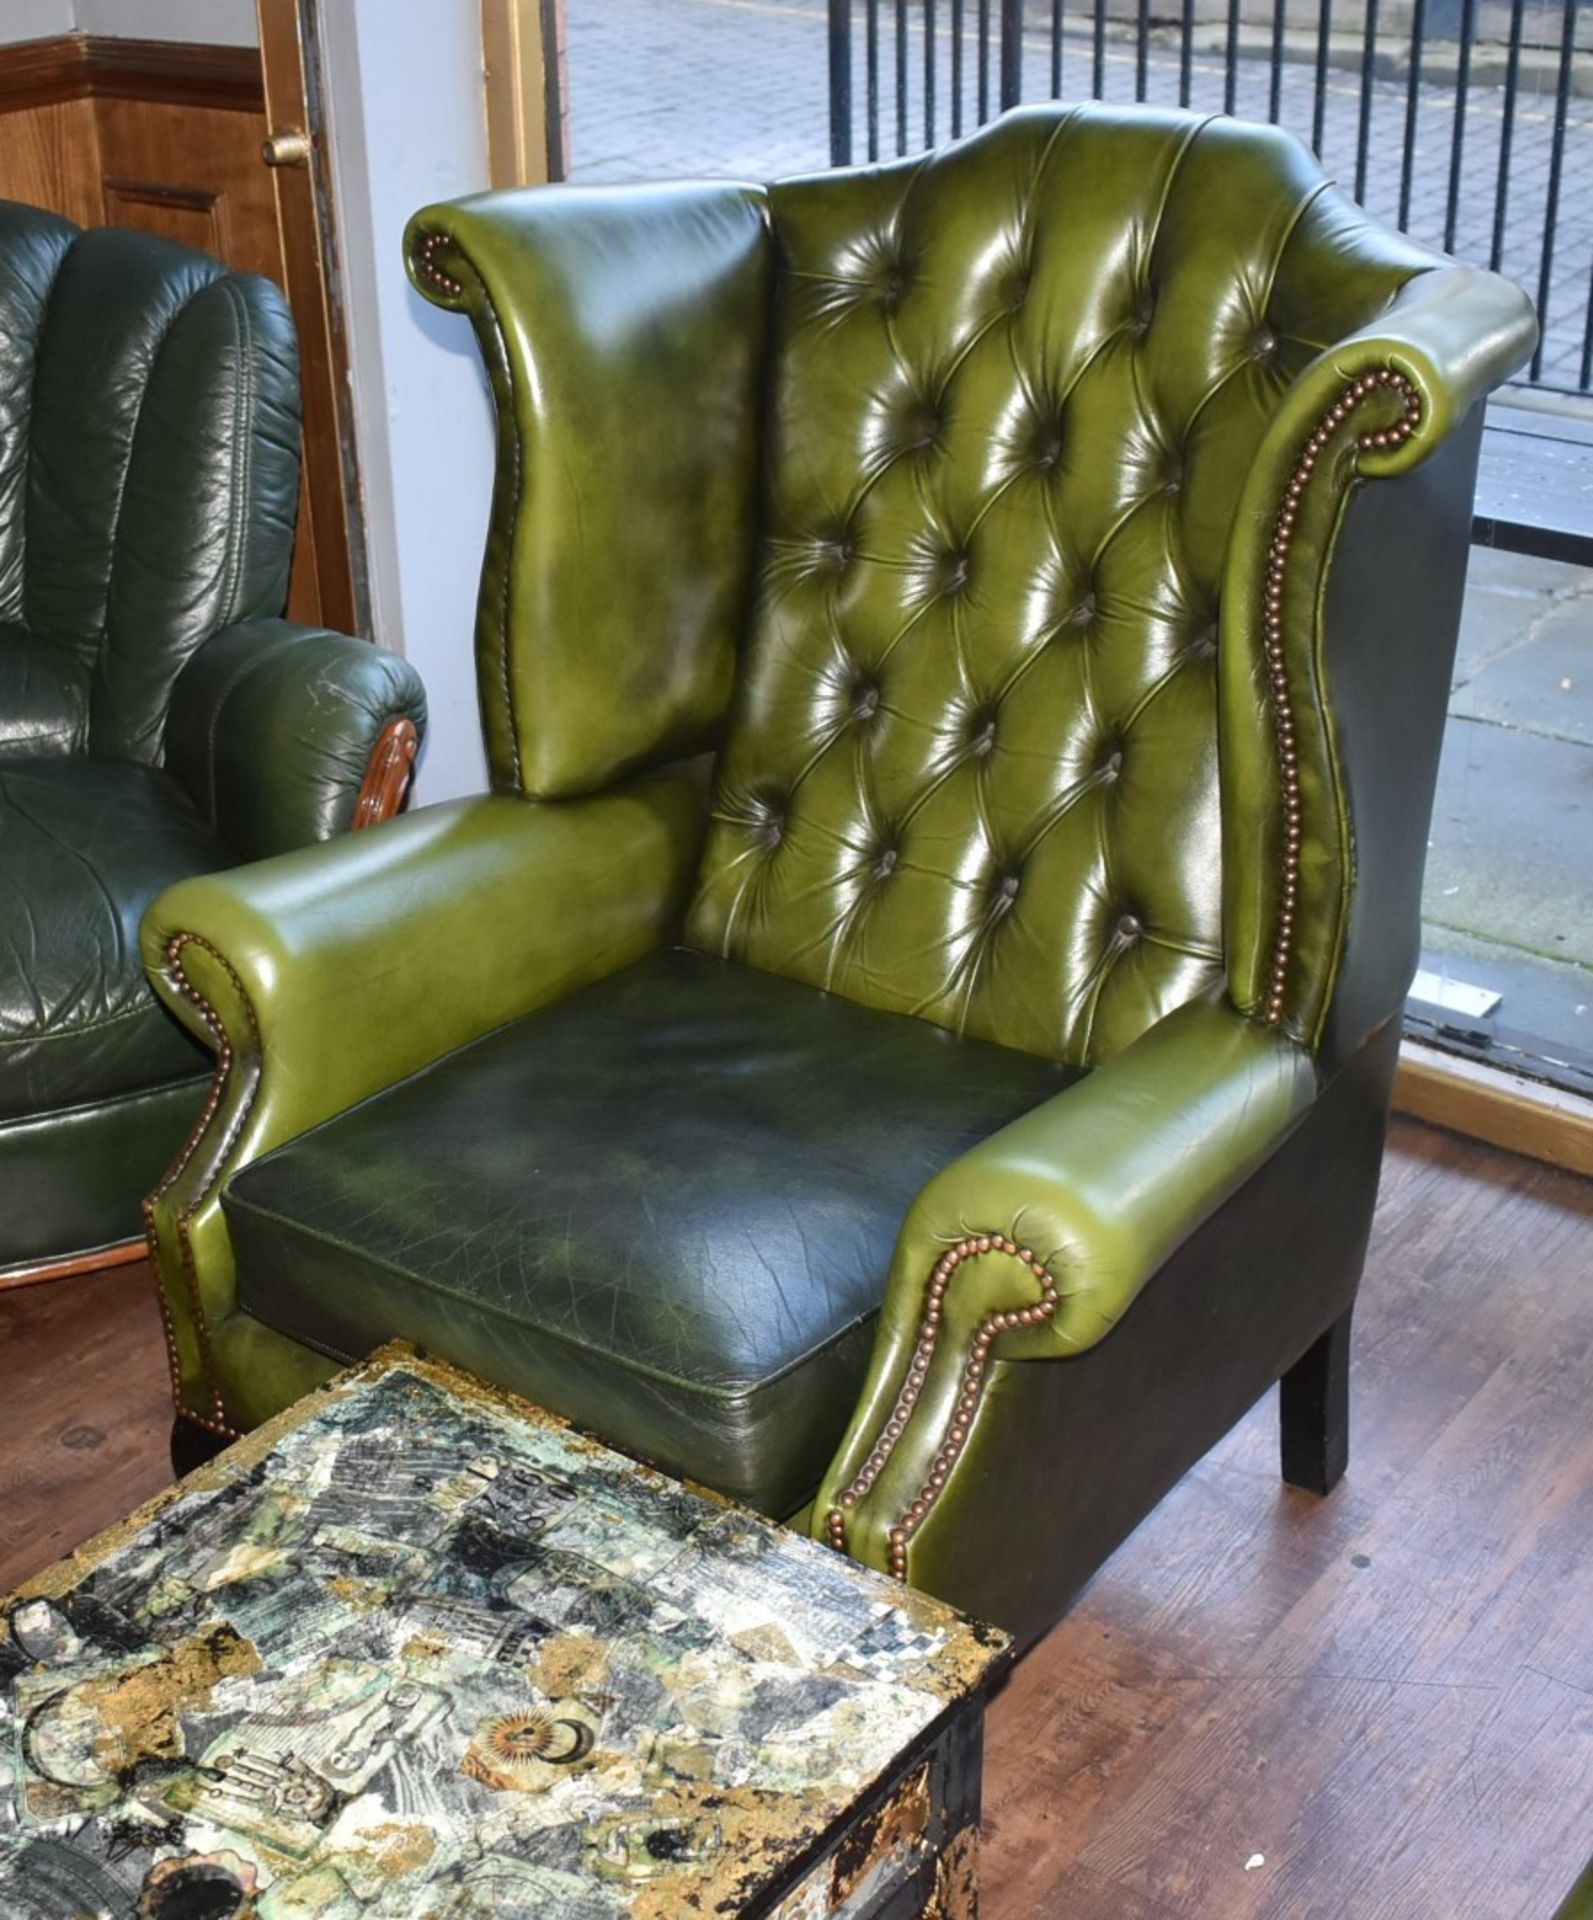 1 x Chesterfield Style Wingback Armchair In Antique Green Leather With Queen Anne Legs - Image 2 of 2